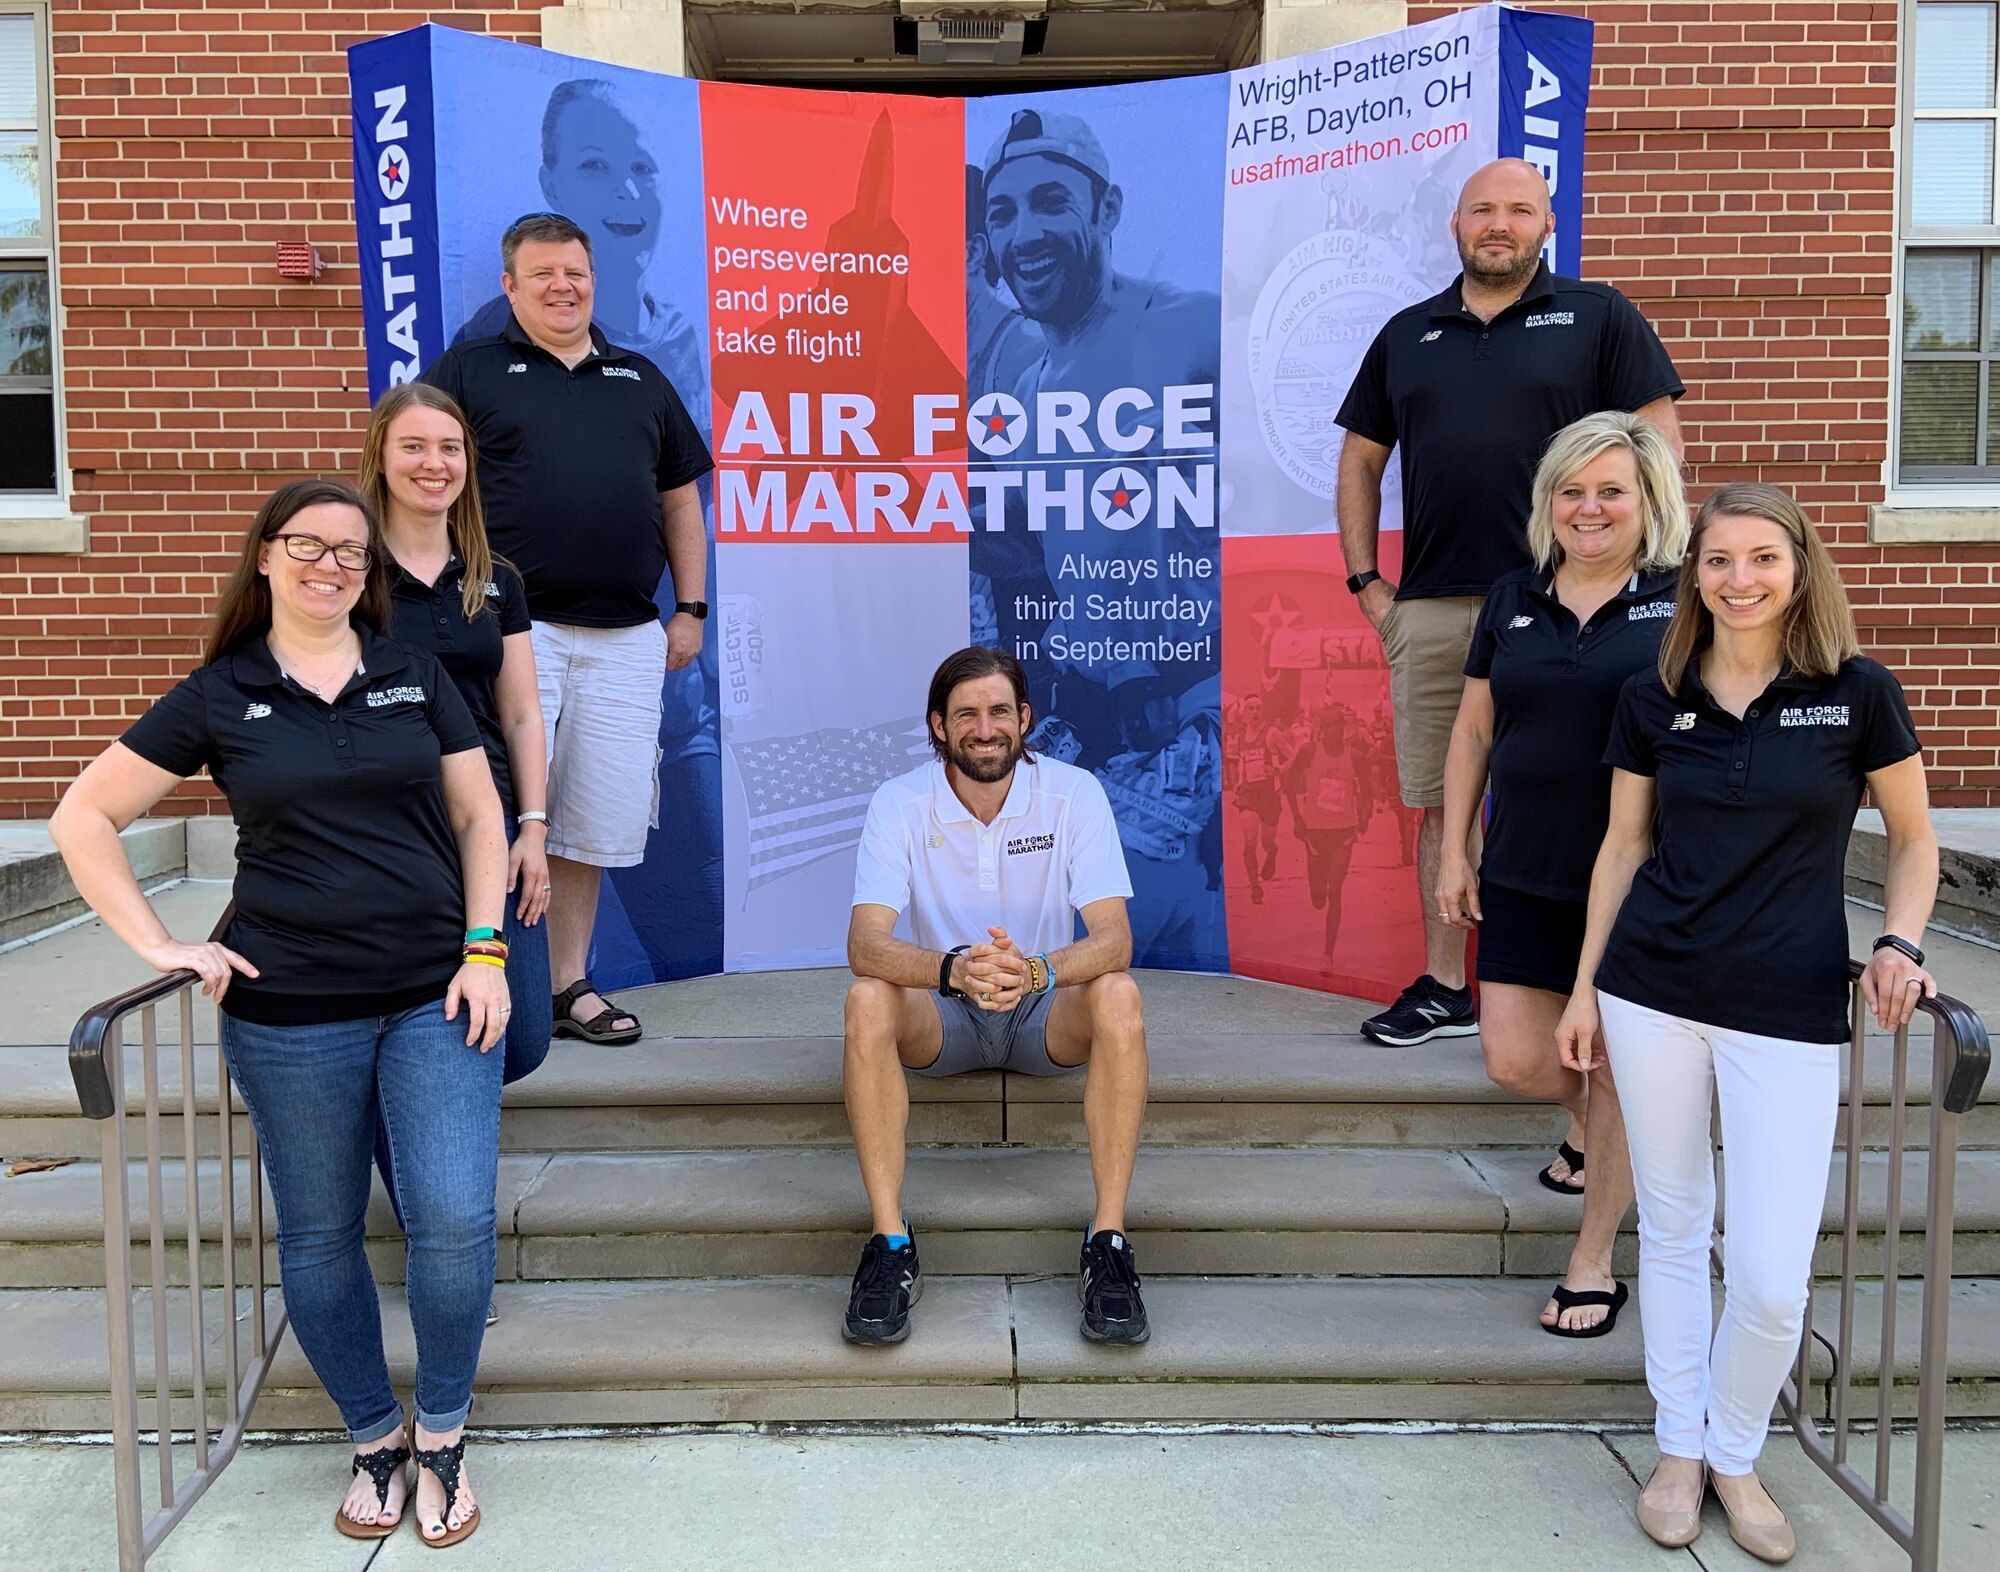 The Air Force Marathon staff works year round to plan the marathon and each has an integral part in the success. Left to right, Rachael McKinney, Katie Klein, Rick Perron, Brandon Hough, Jordan West, Jeanette Monaghan and Alex Hausfeld. (U.S. Air Force photo/Stacey Geiger)